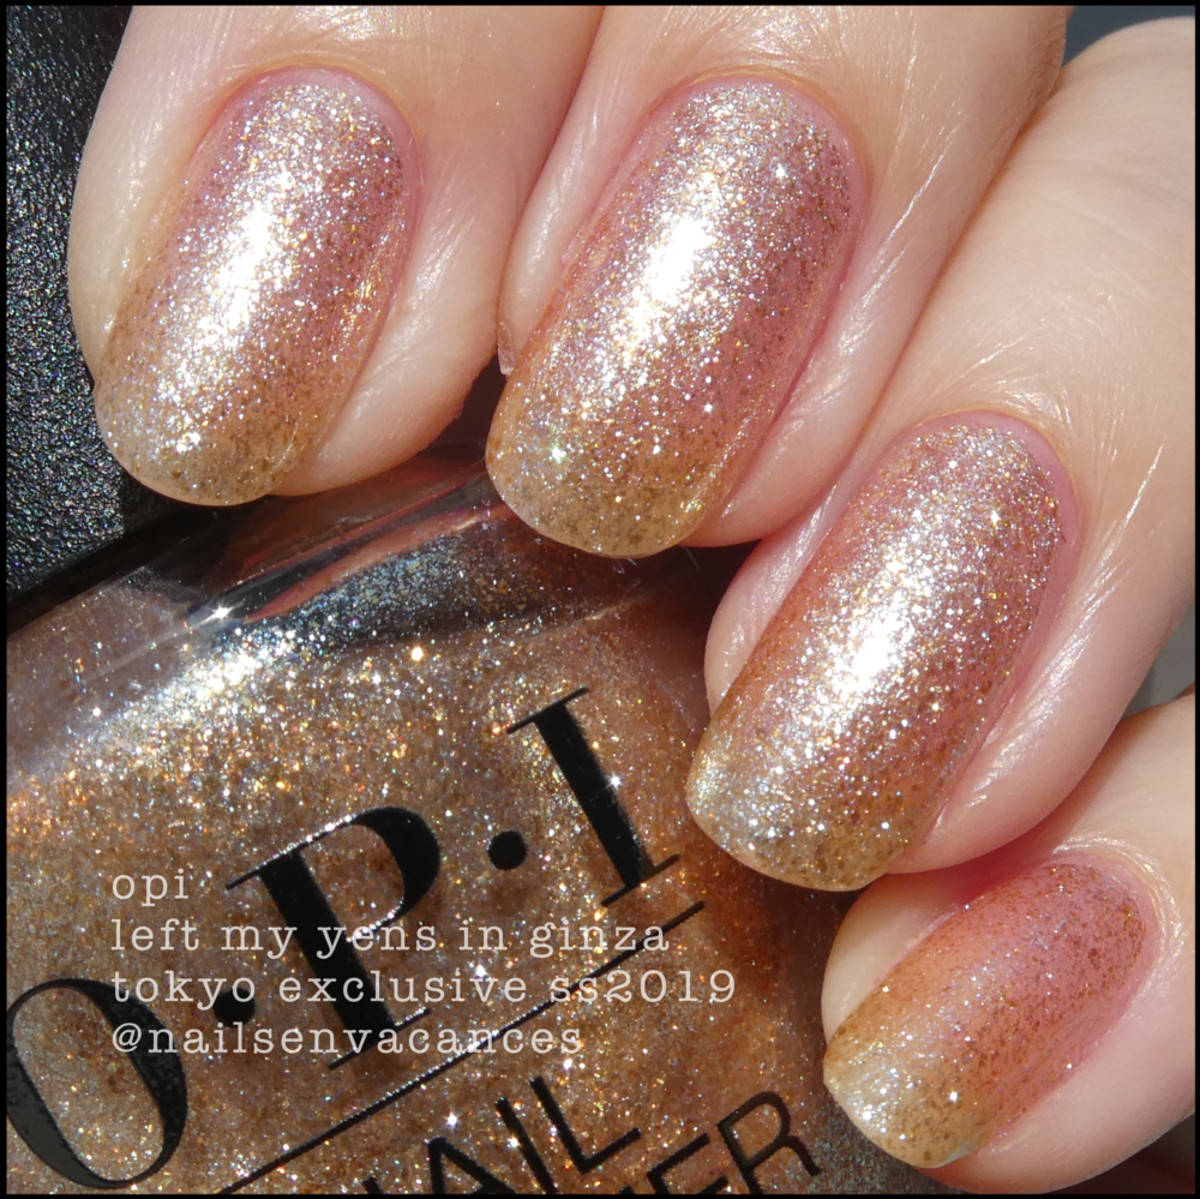 OPI Left My Yens in Ginza - OPI Tokyo Ulta Exclusives ss2019